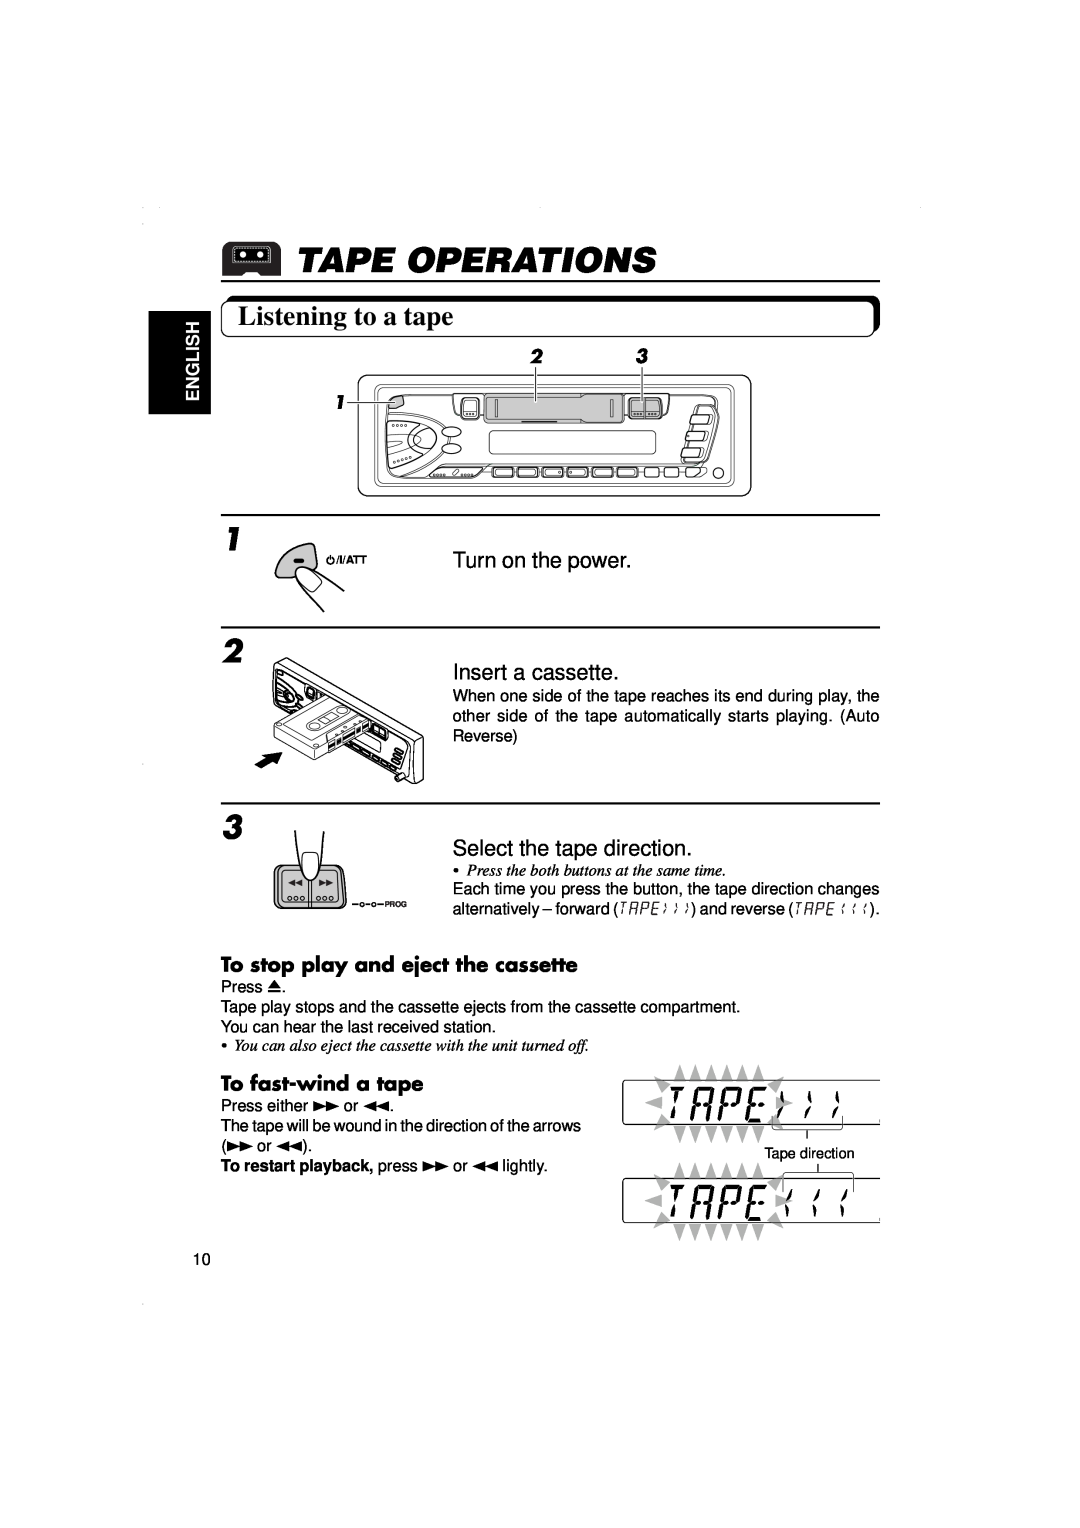 JVC KS-F315EE manual Tape Operations, Listening to a tape, Turn on the power, To stop play and eject the cassette, English 